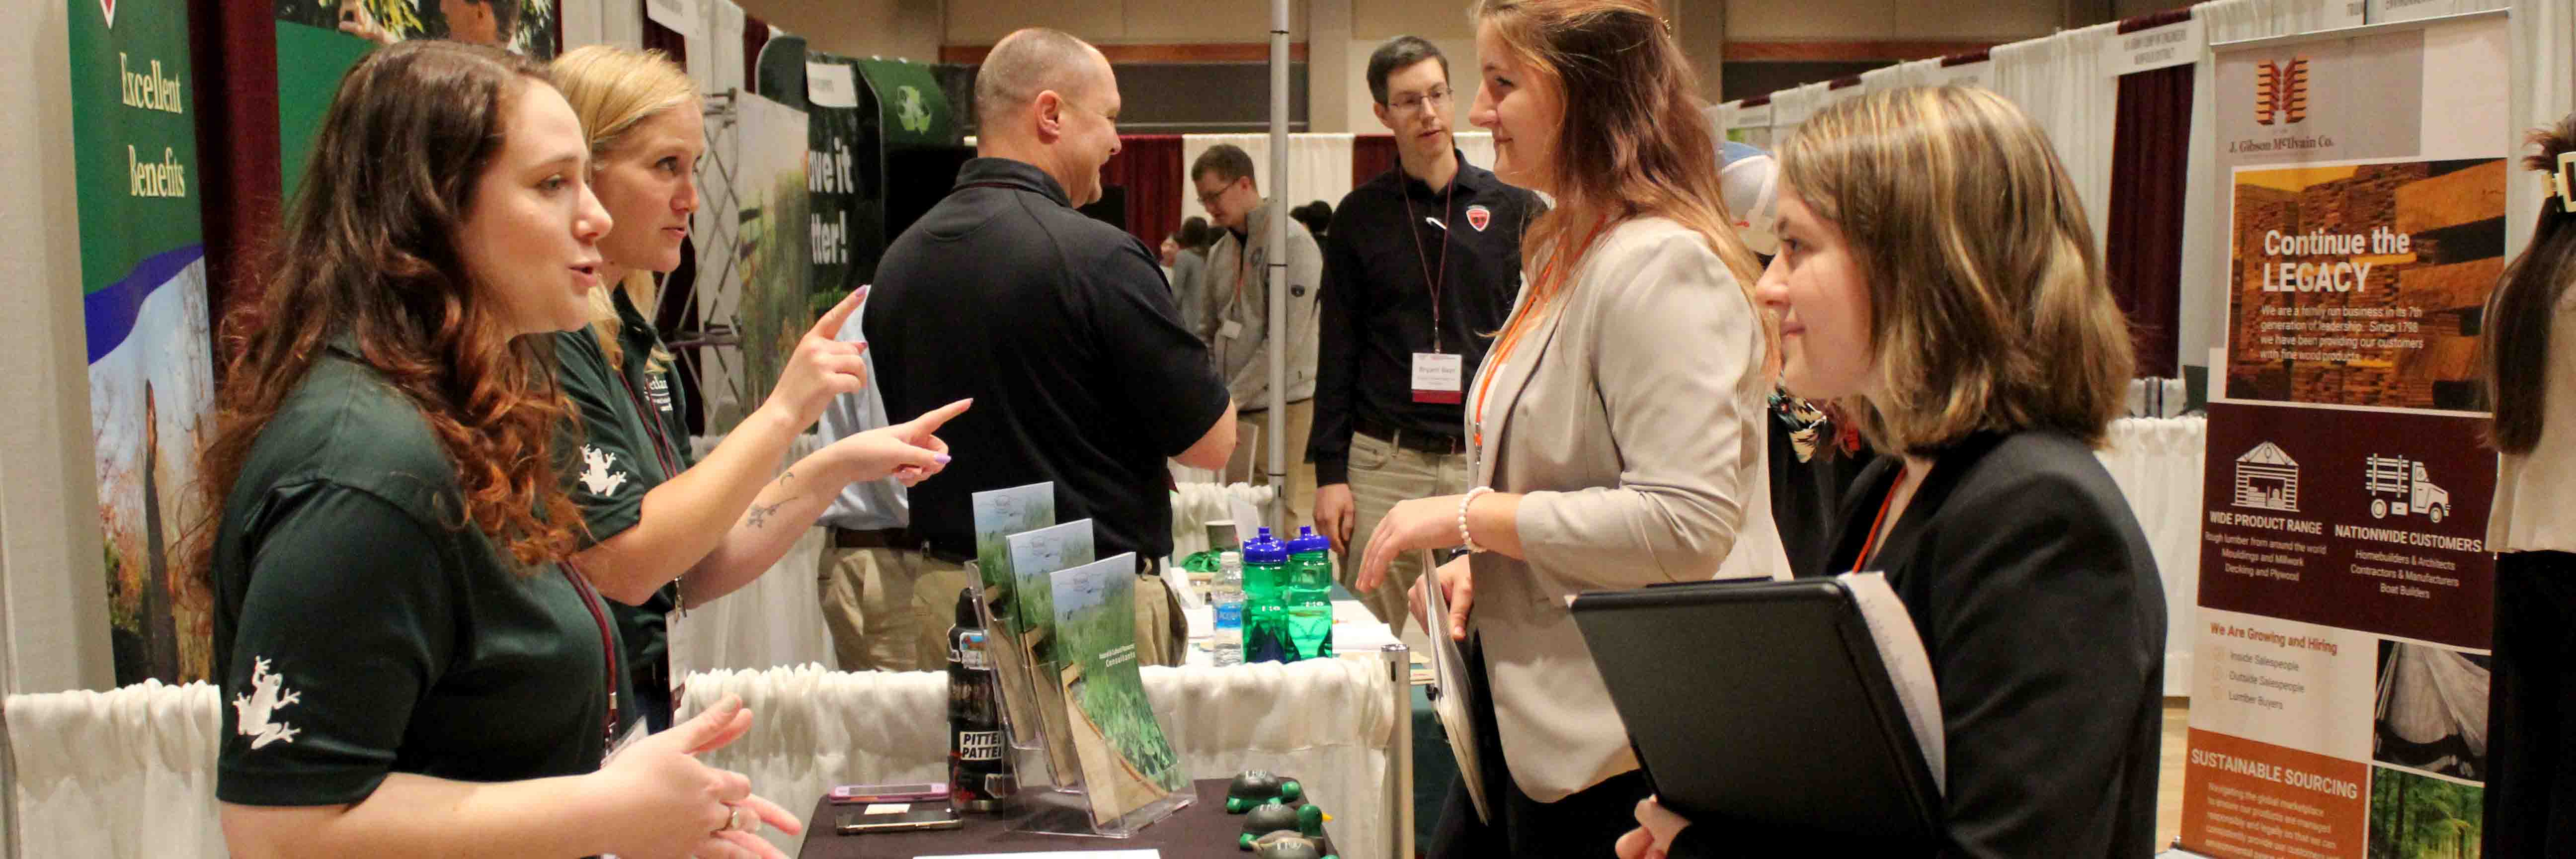 Employers talking to students at a career fair booth